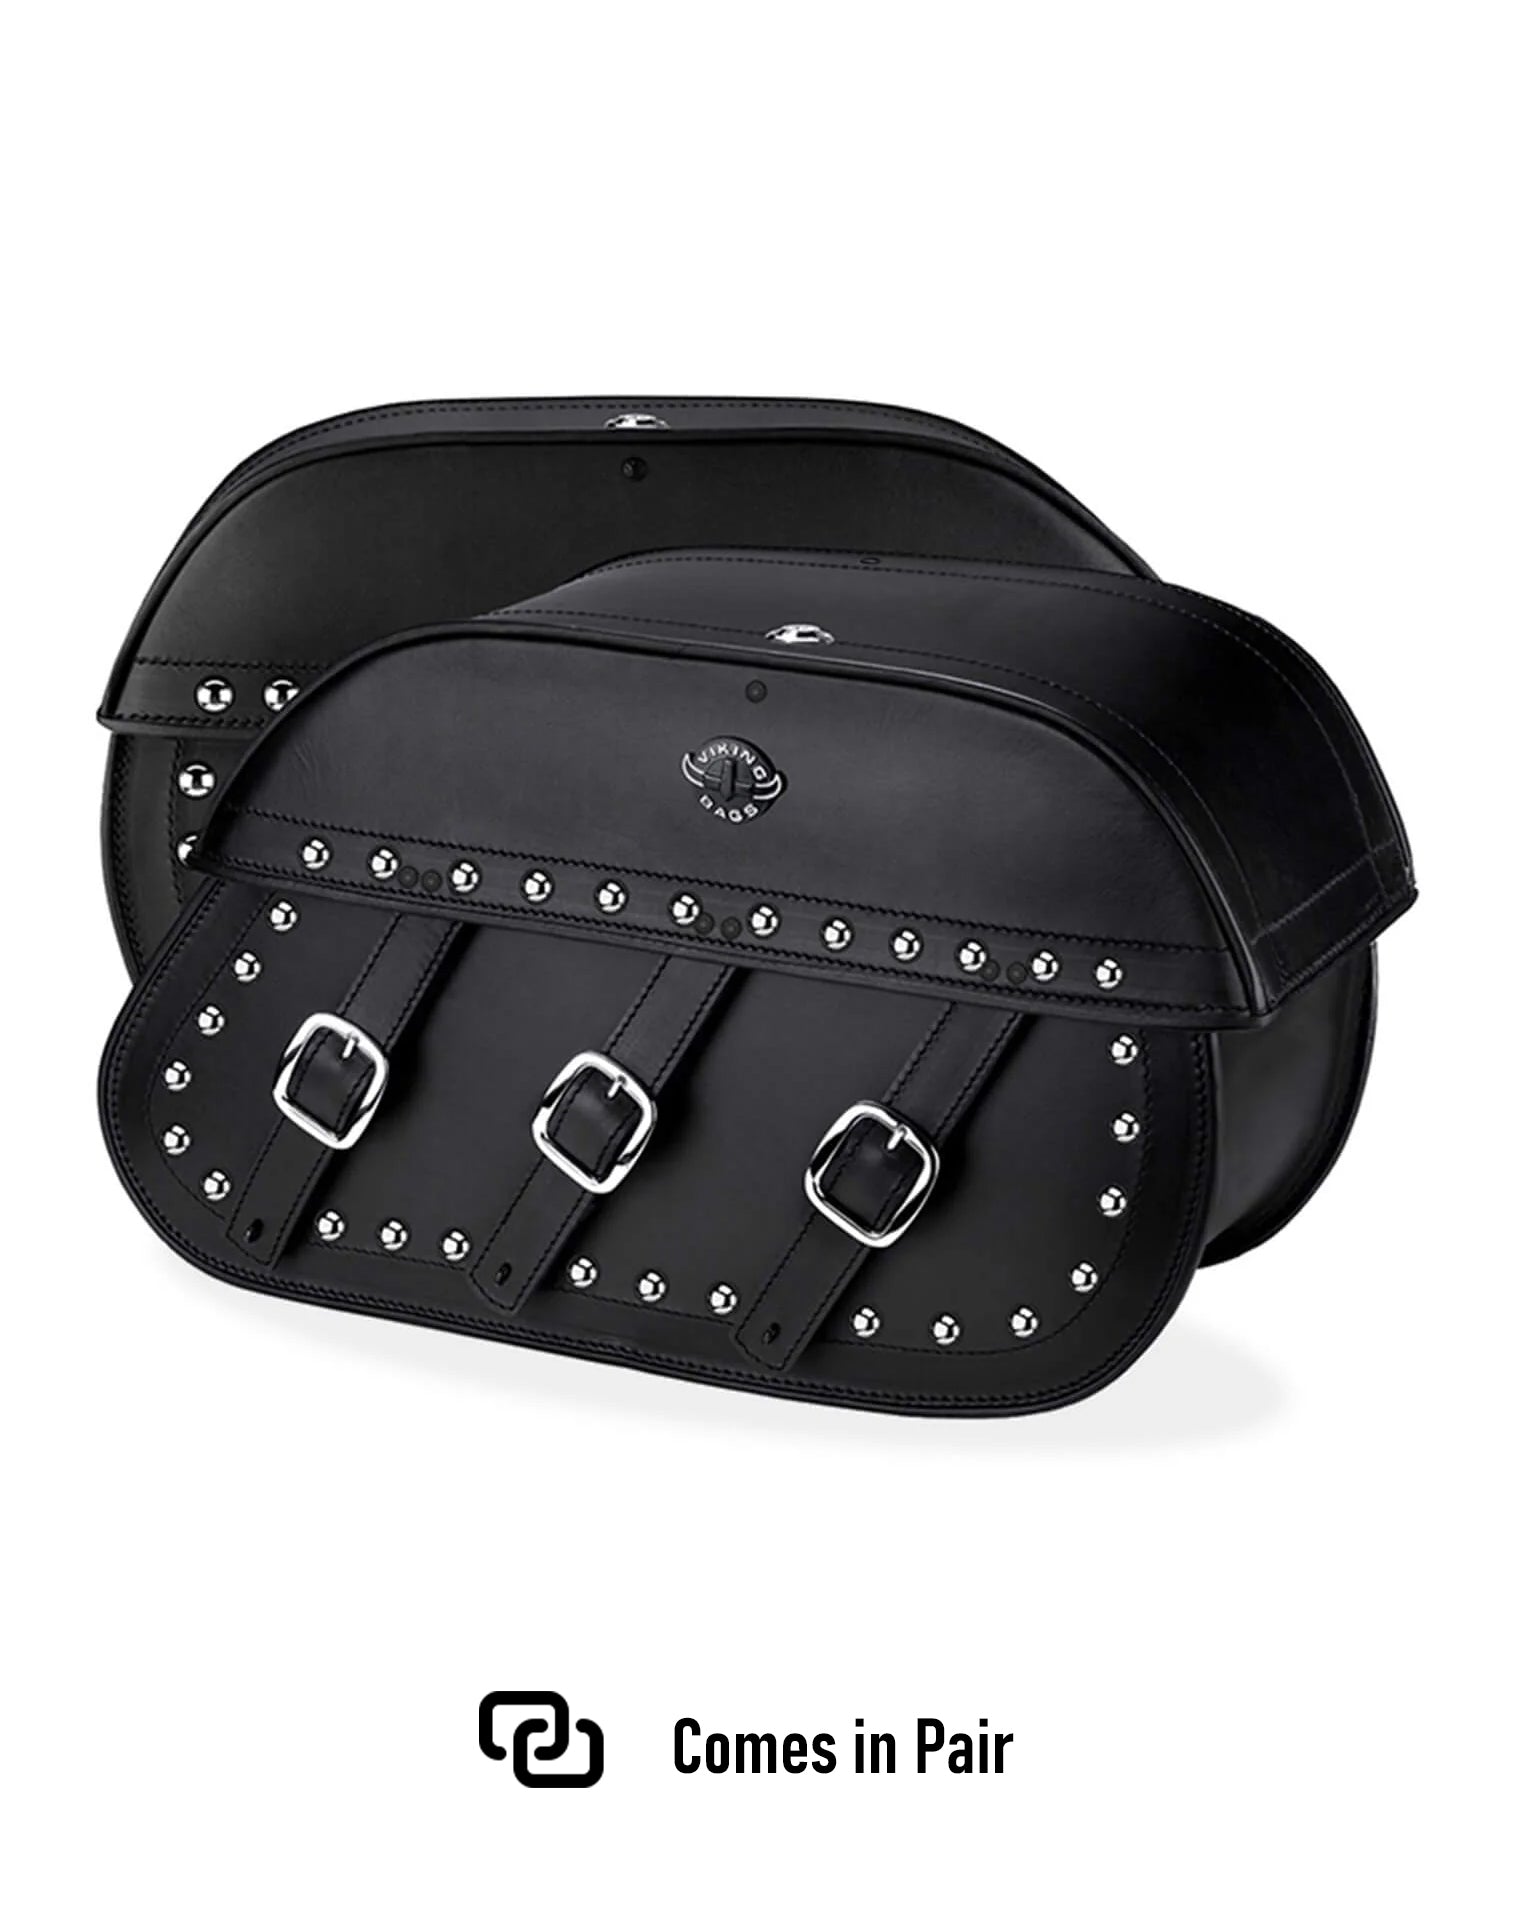 Viking Trianon Extra Large Studded Leather Motorcycle Saddlebags For Harley Softail Slim Weather Resistant Bags Comes in Pair